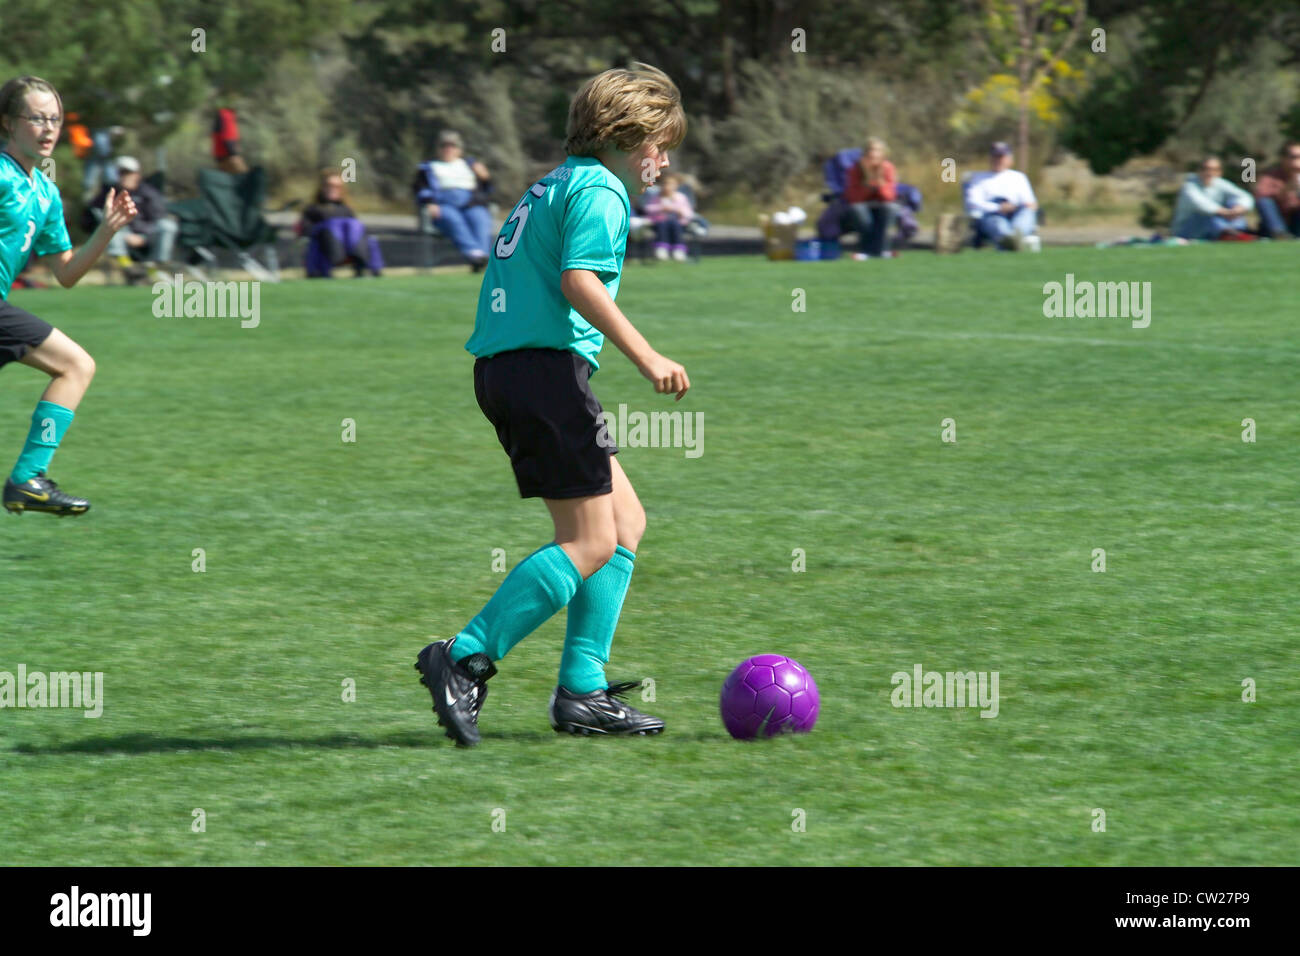 A young girl races across the playing field to kick the soccer ball during an after-school match watched by family and friends in Bend, Oregon, USA. Stock Photo